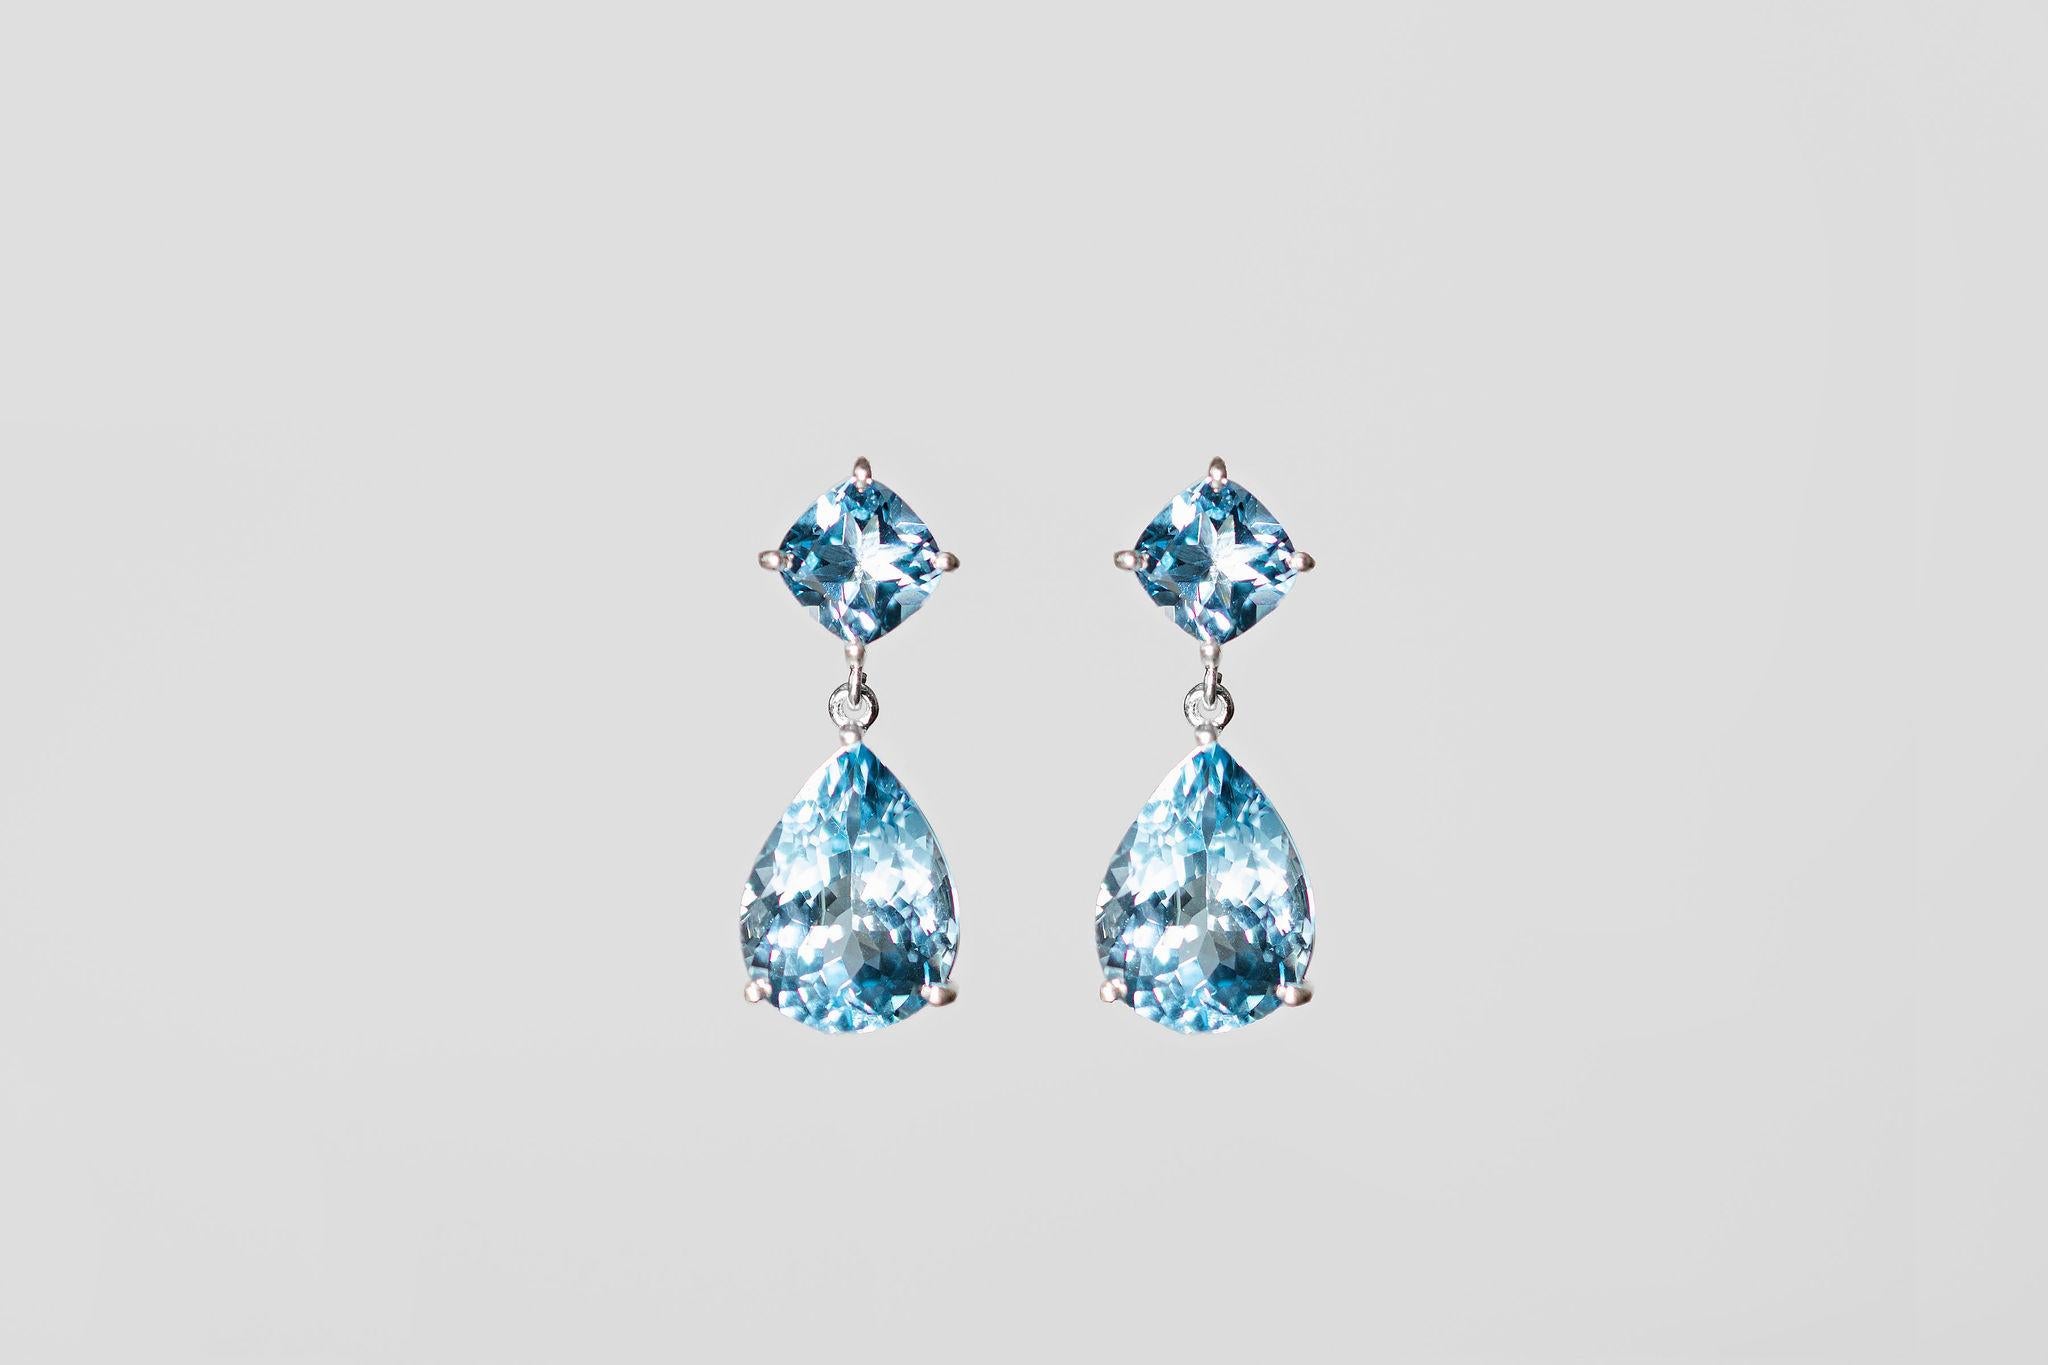 Elevate your style with these glamorous drop earrings. Handmade using recycled sterling silver and Swiss Blue Topaz. The pear-shaped stone is 6 carats, and the square top stone is 1ct. They are exceptionally well cut and crafted using upcycled Swiss